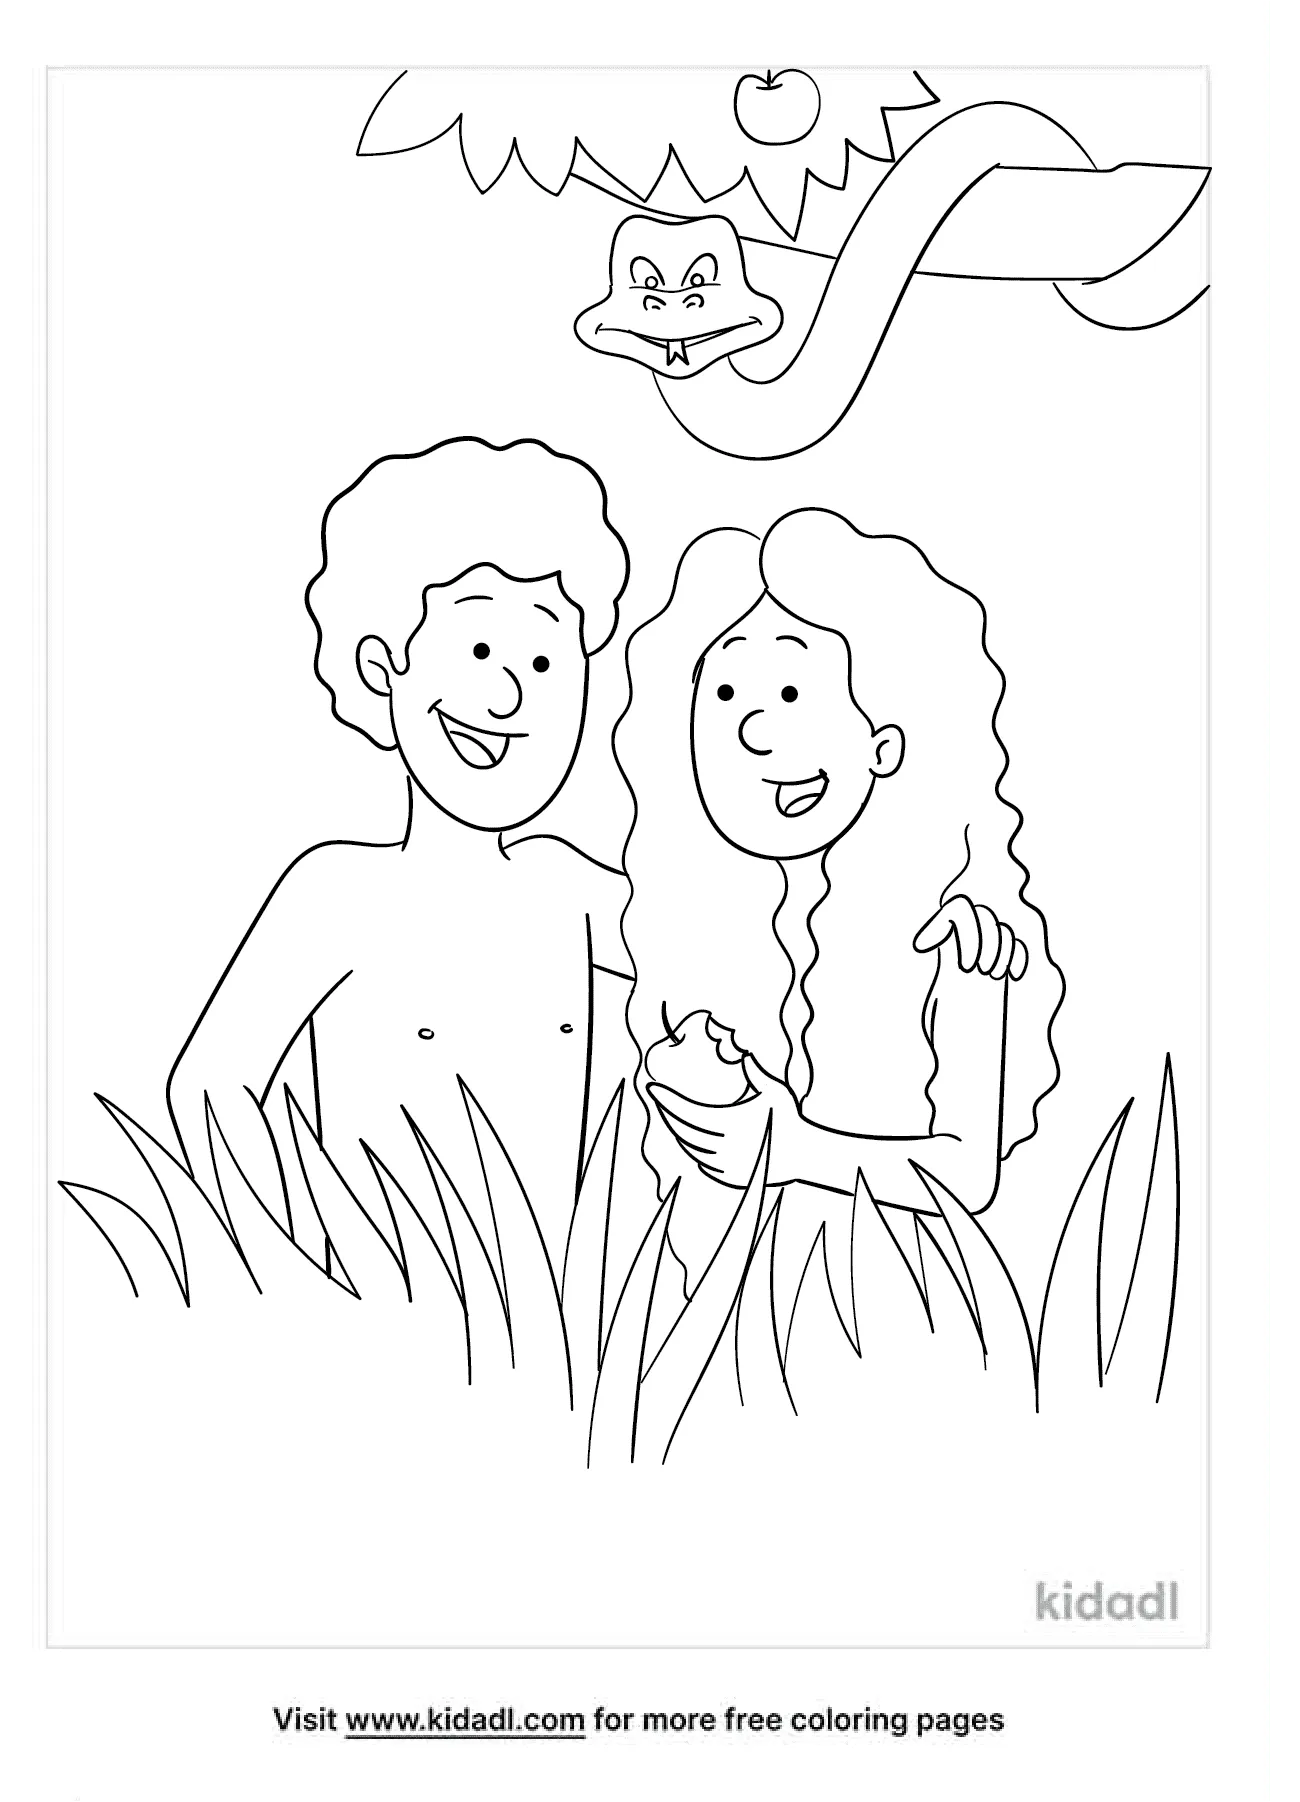 Adam And Eve Sin Coloring Pages   Free Bible Coloring Pages   Kidadl